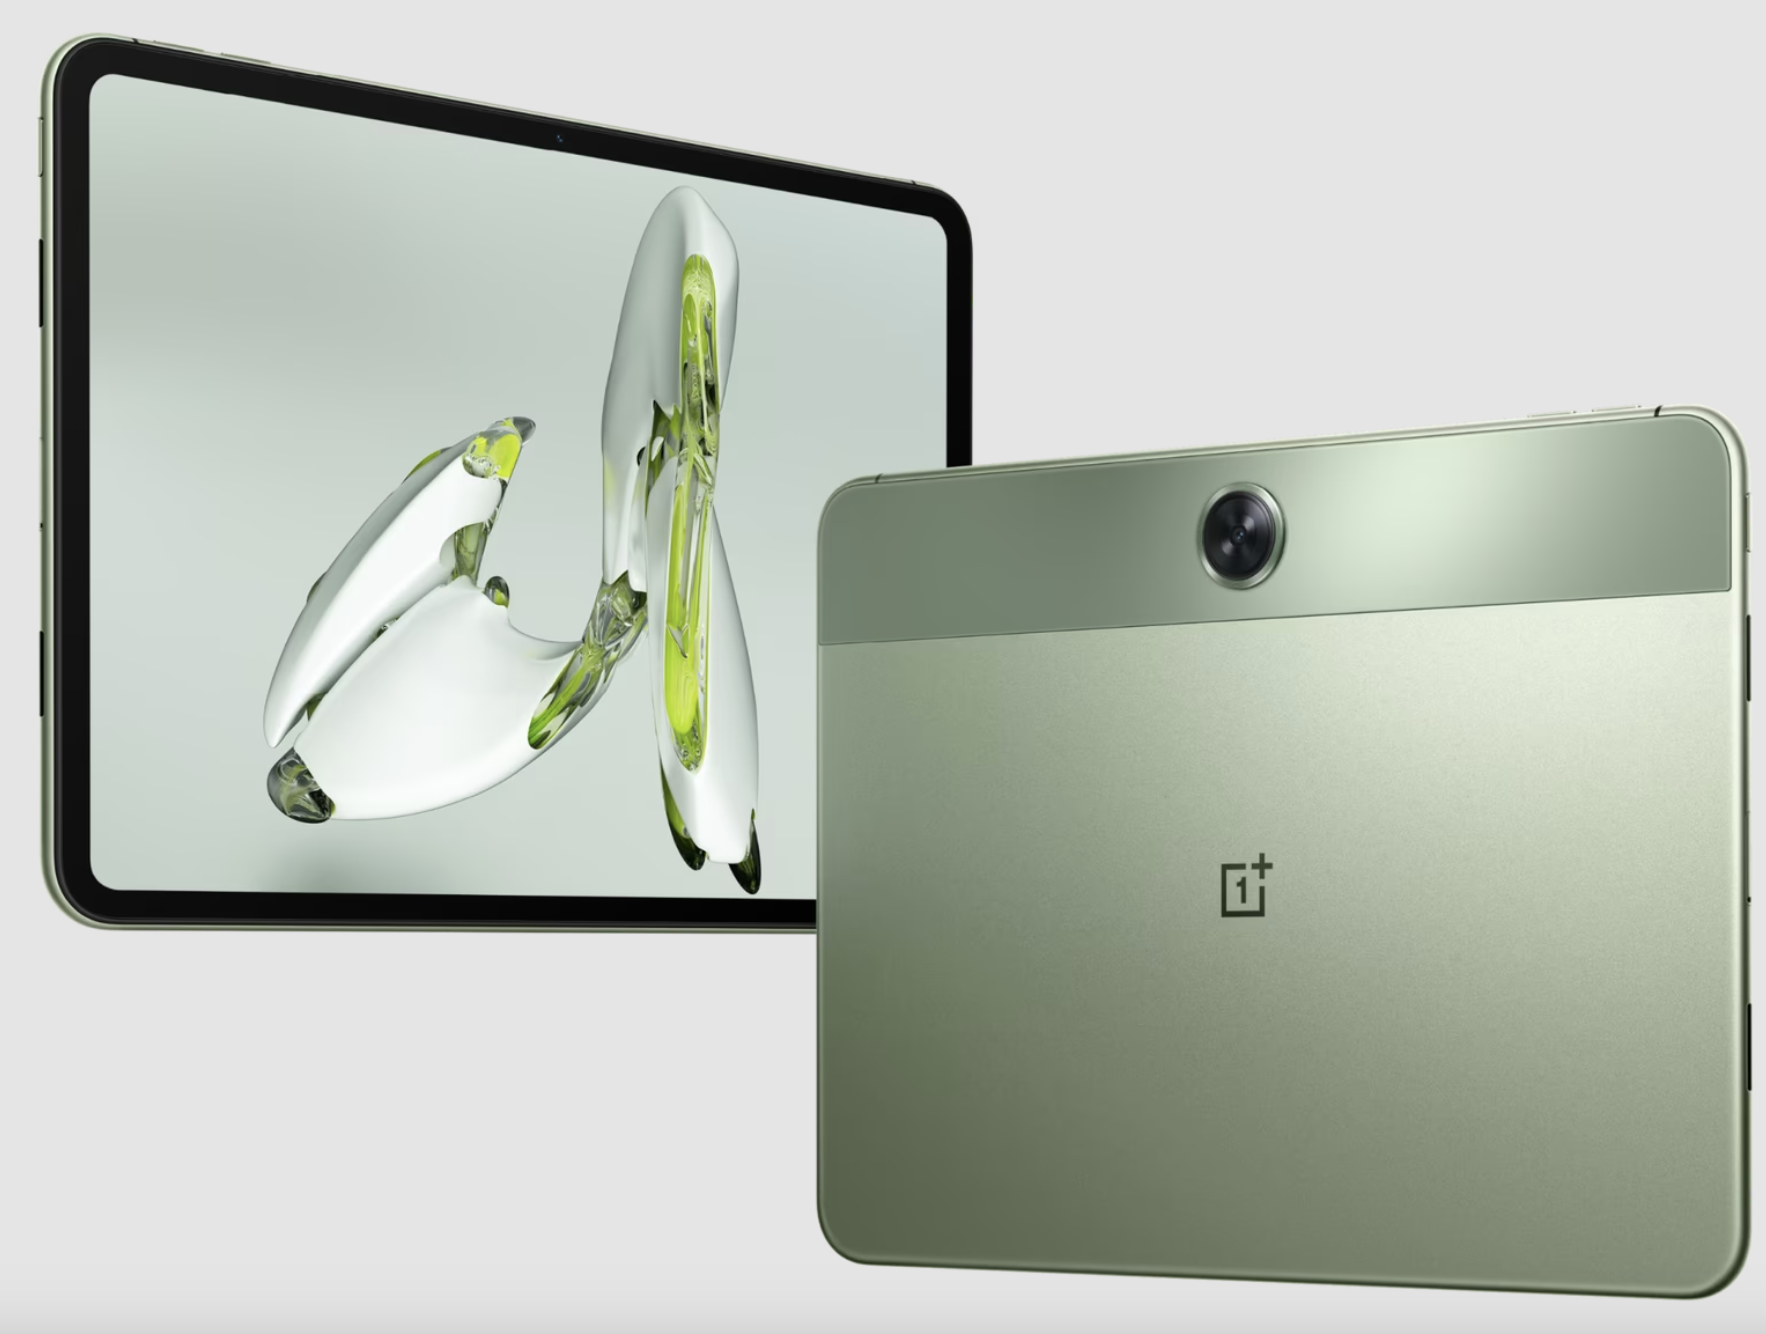 OnePlus' New sub-$300 Tablet Targets Affordable Rivals